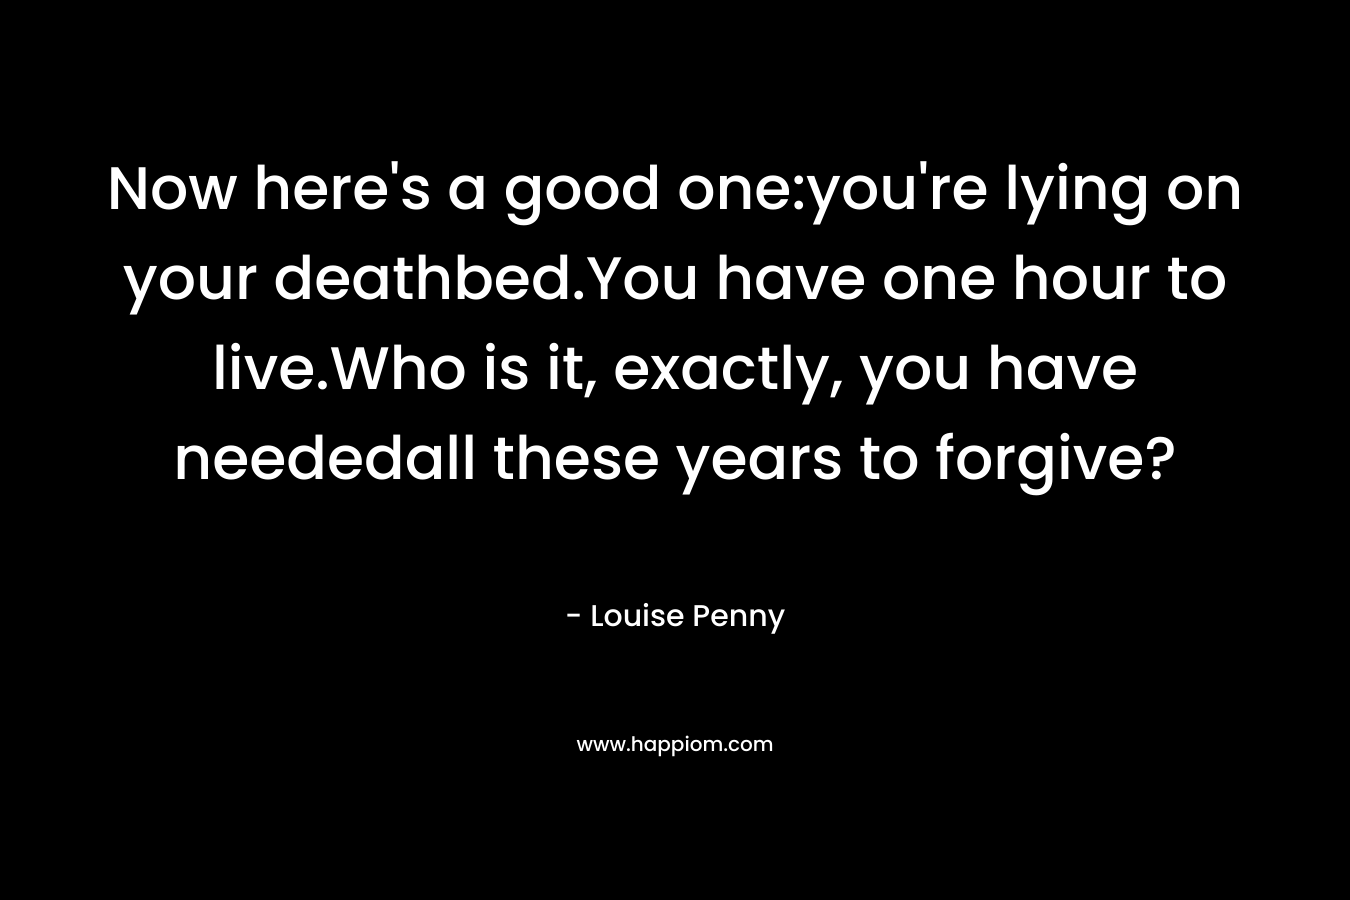 Now here’s a good one:you’re lying on your deathbed.You have one hour to live.Who is it, exactly, you have neededall these years to forgive? – Louise Penny